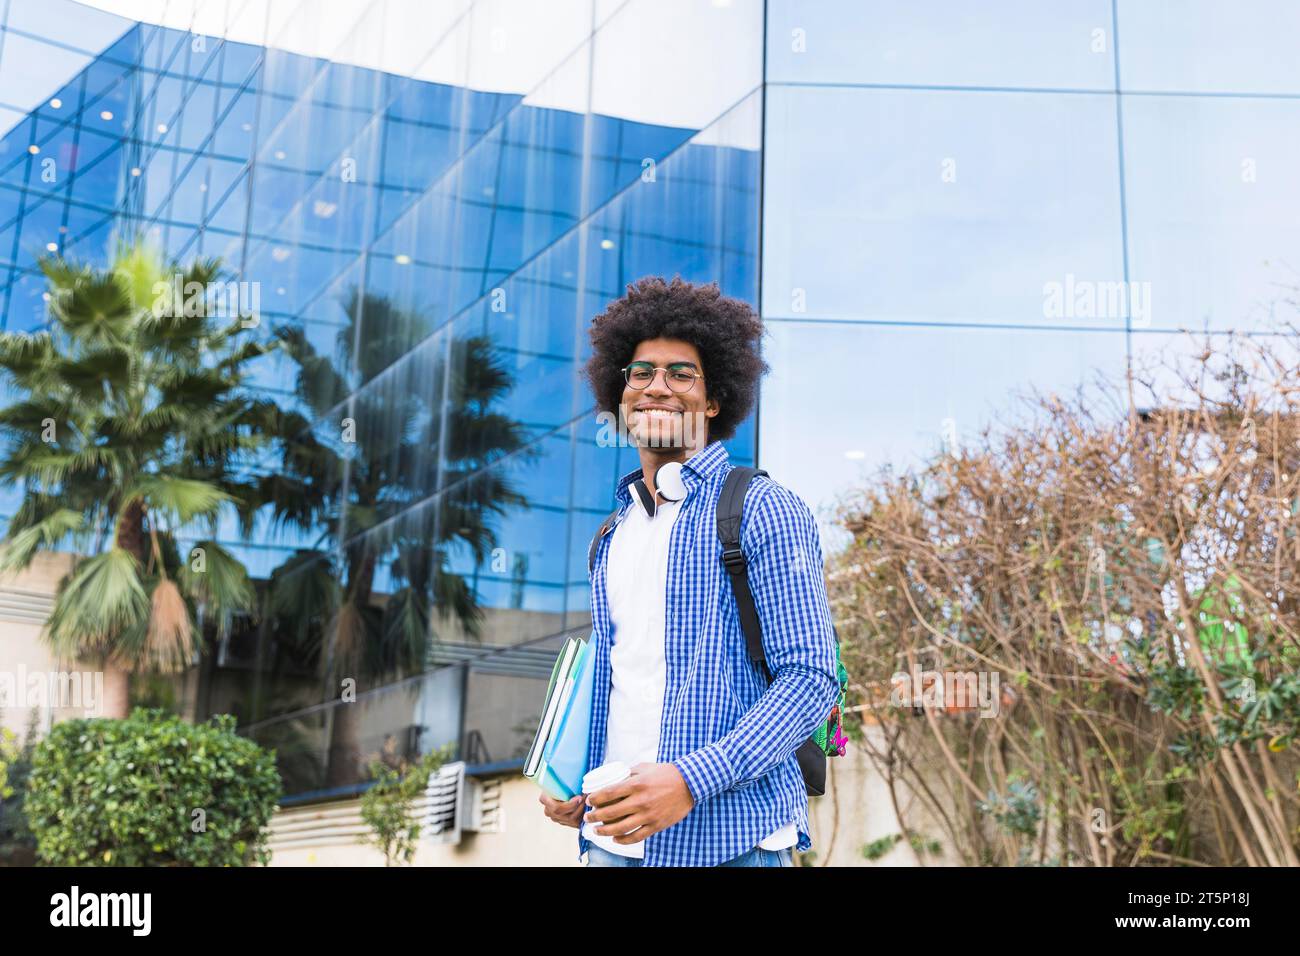 Portrait male young student standing front university building Stock Photo